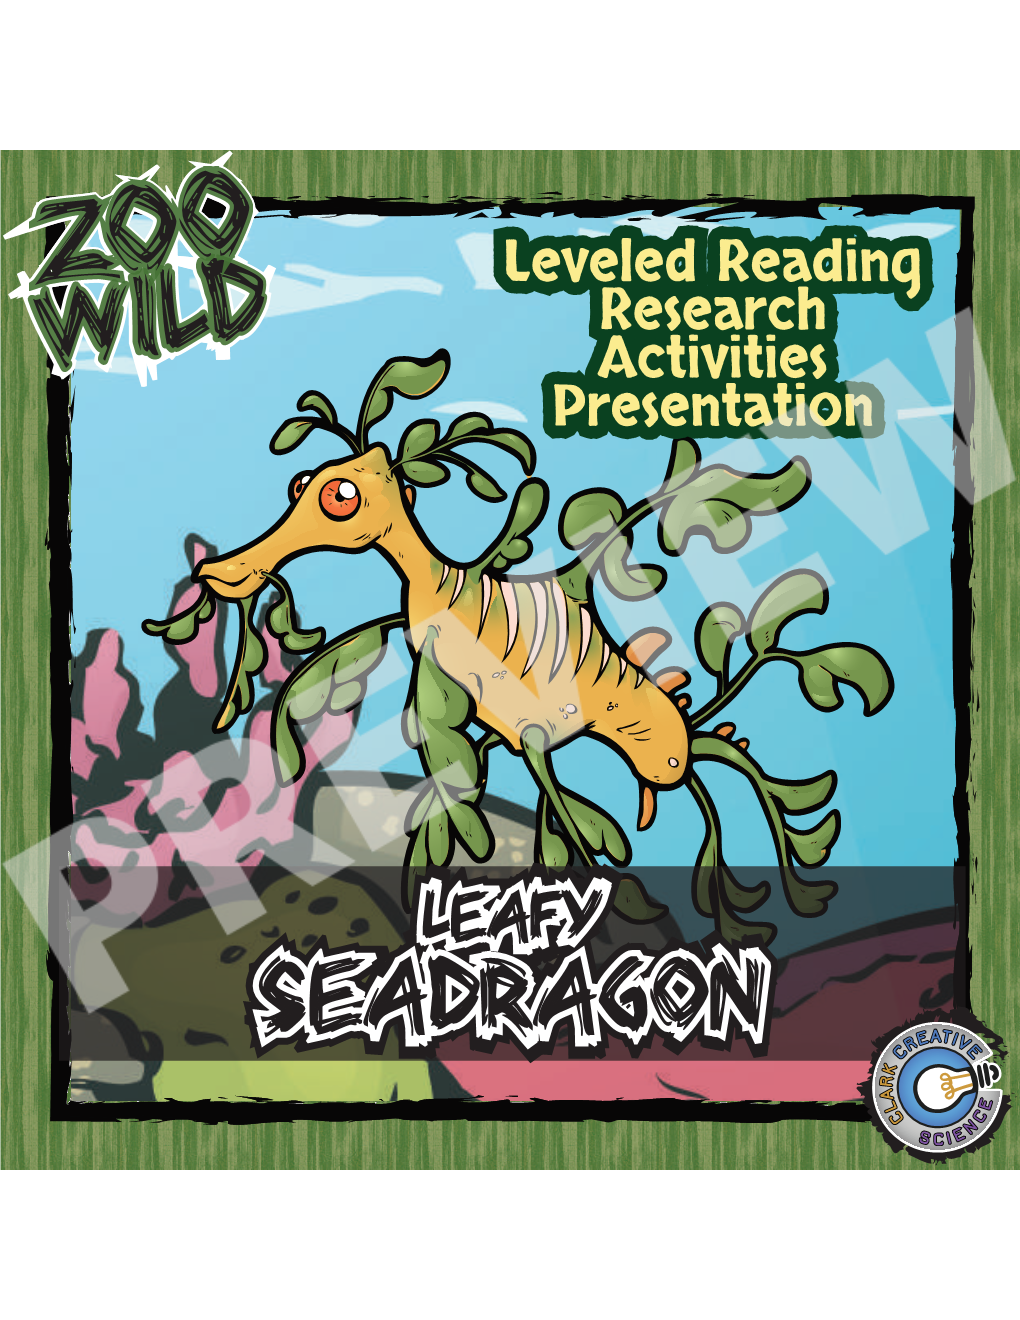 Leveled Reading Research Activities Presentation Leveled Reading